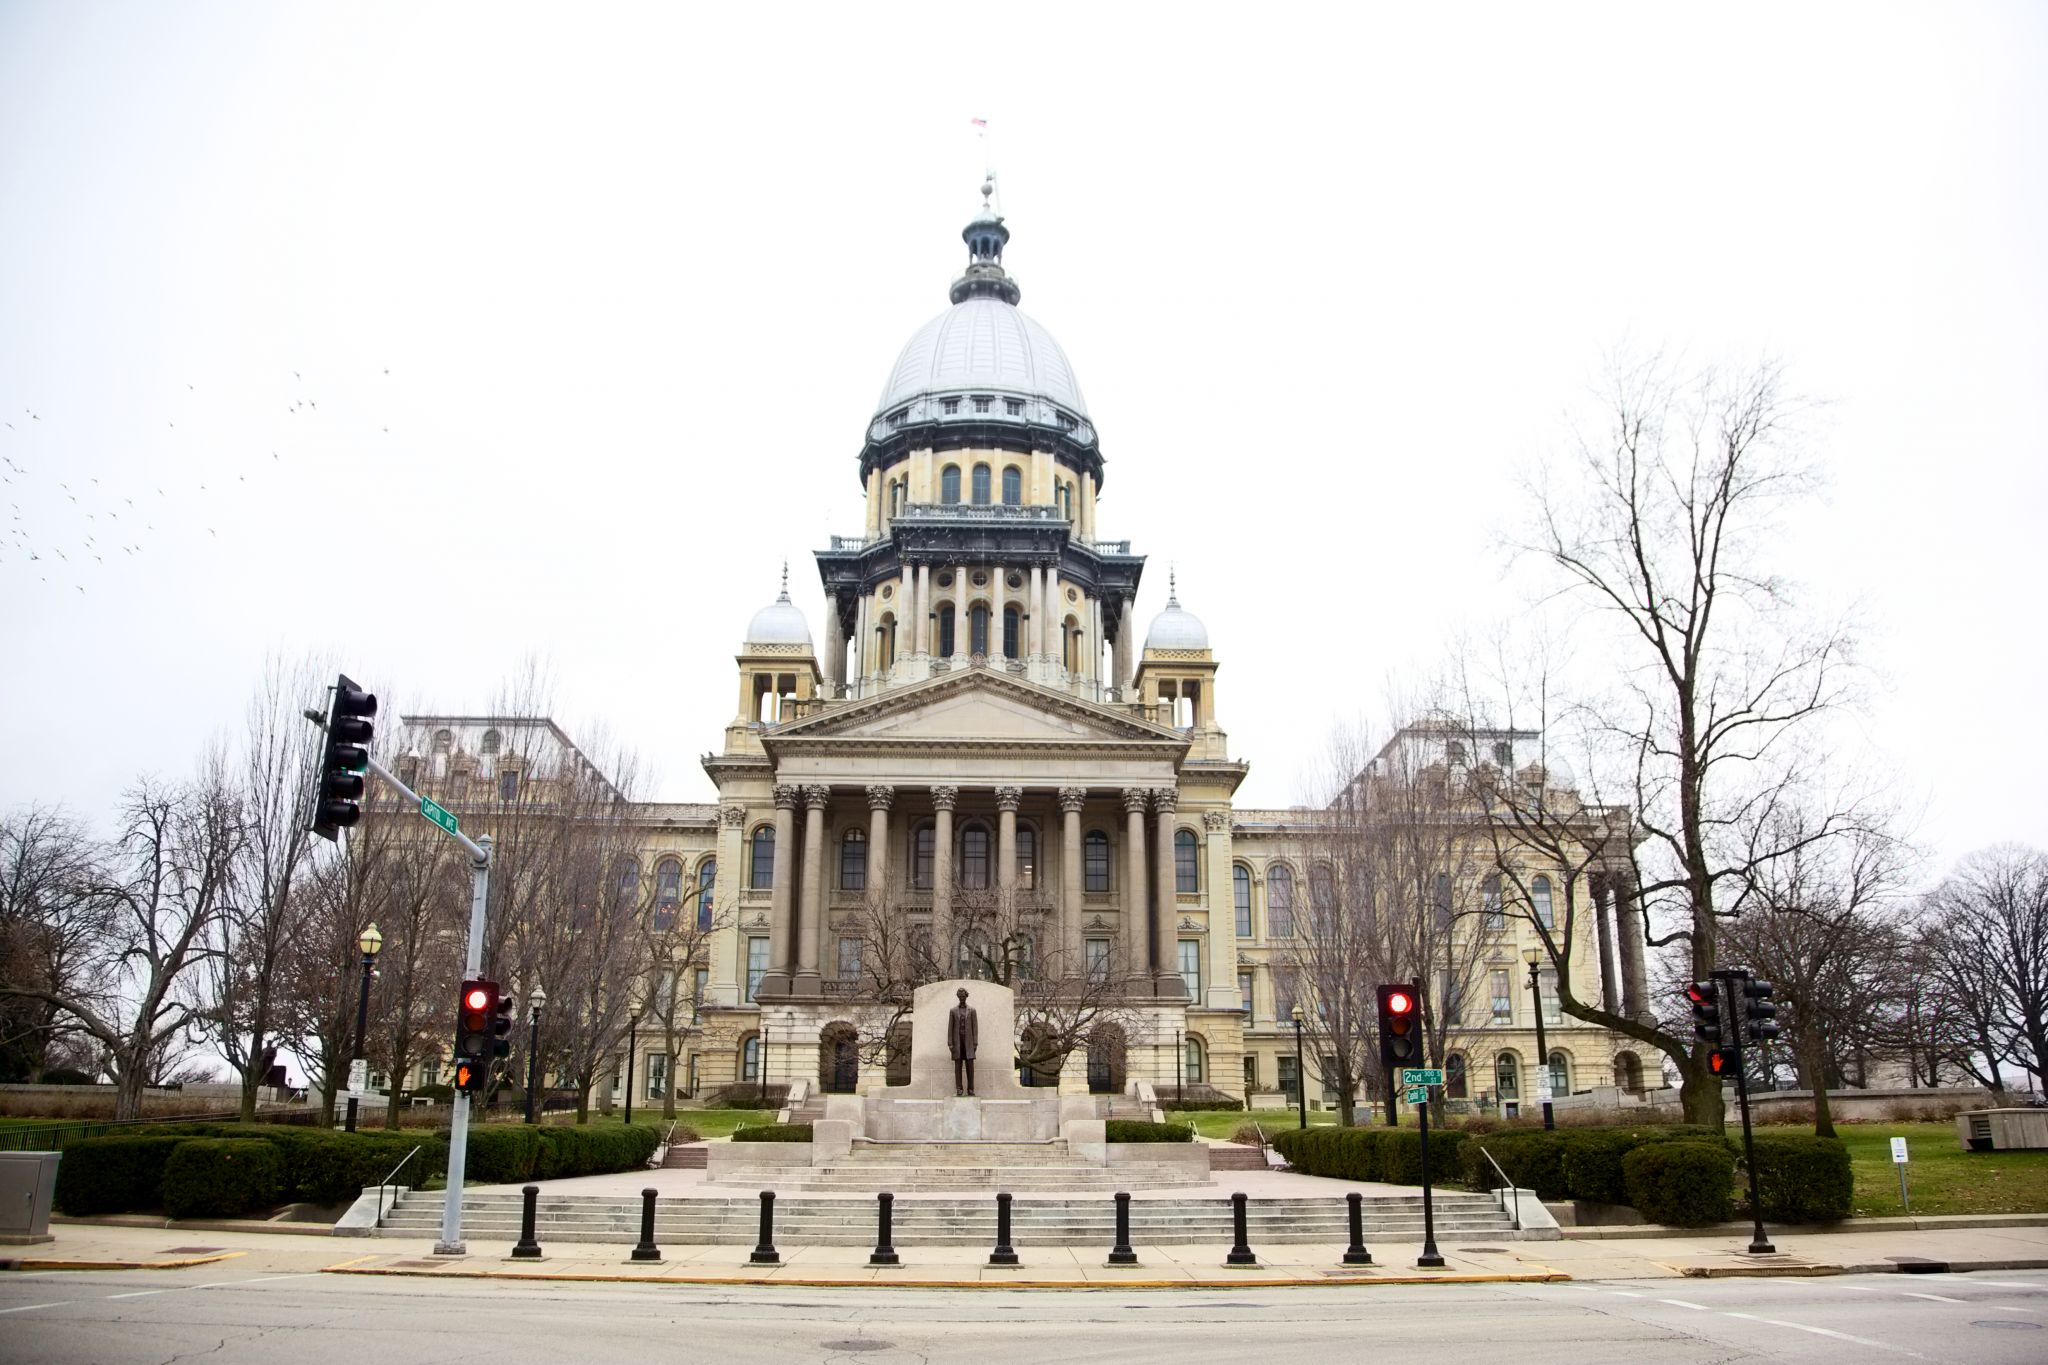 Here is a roundup of resolutions introduced to the Illinois General